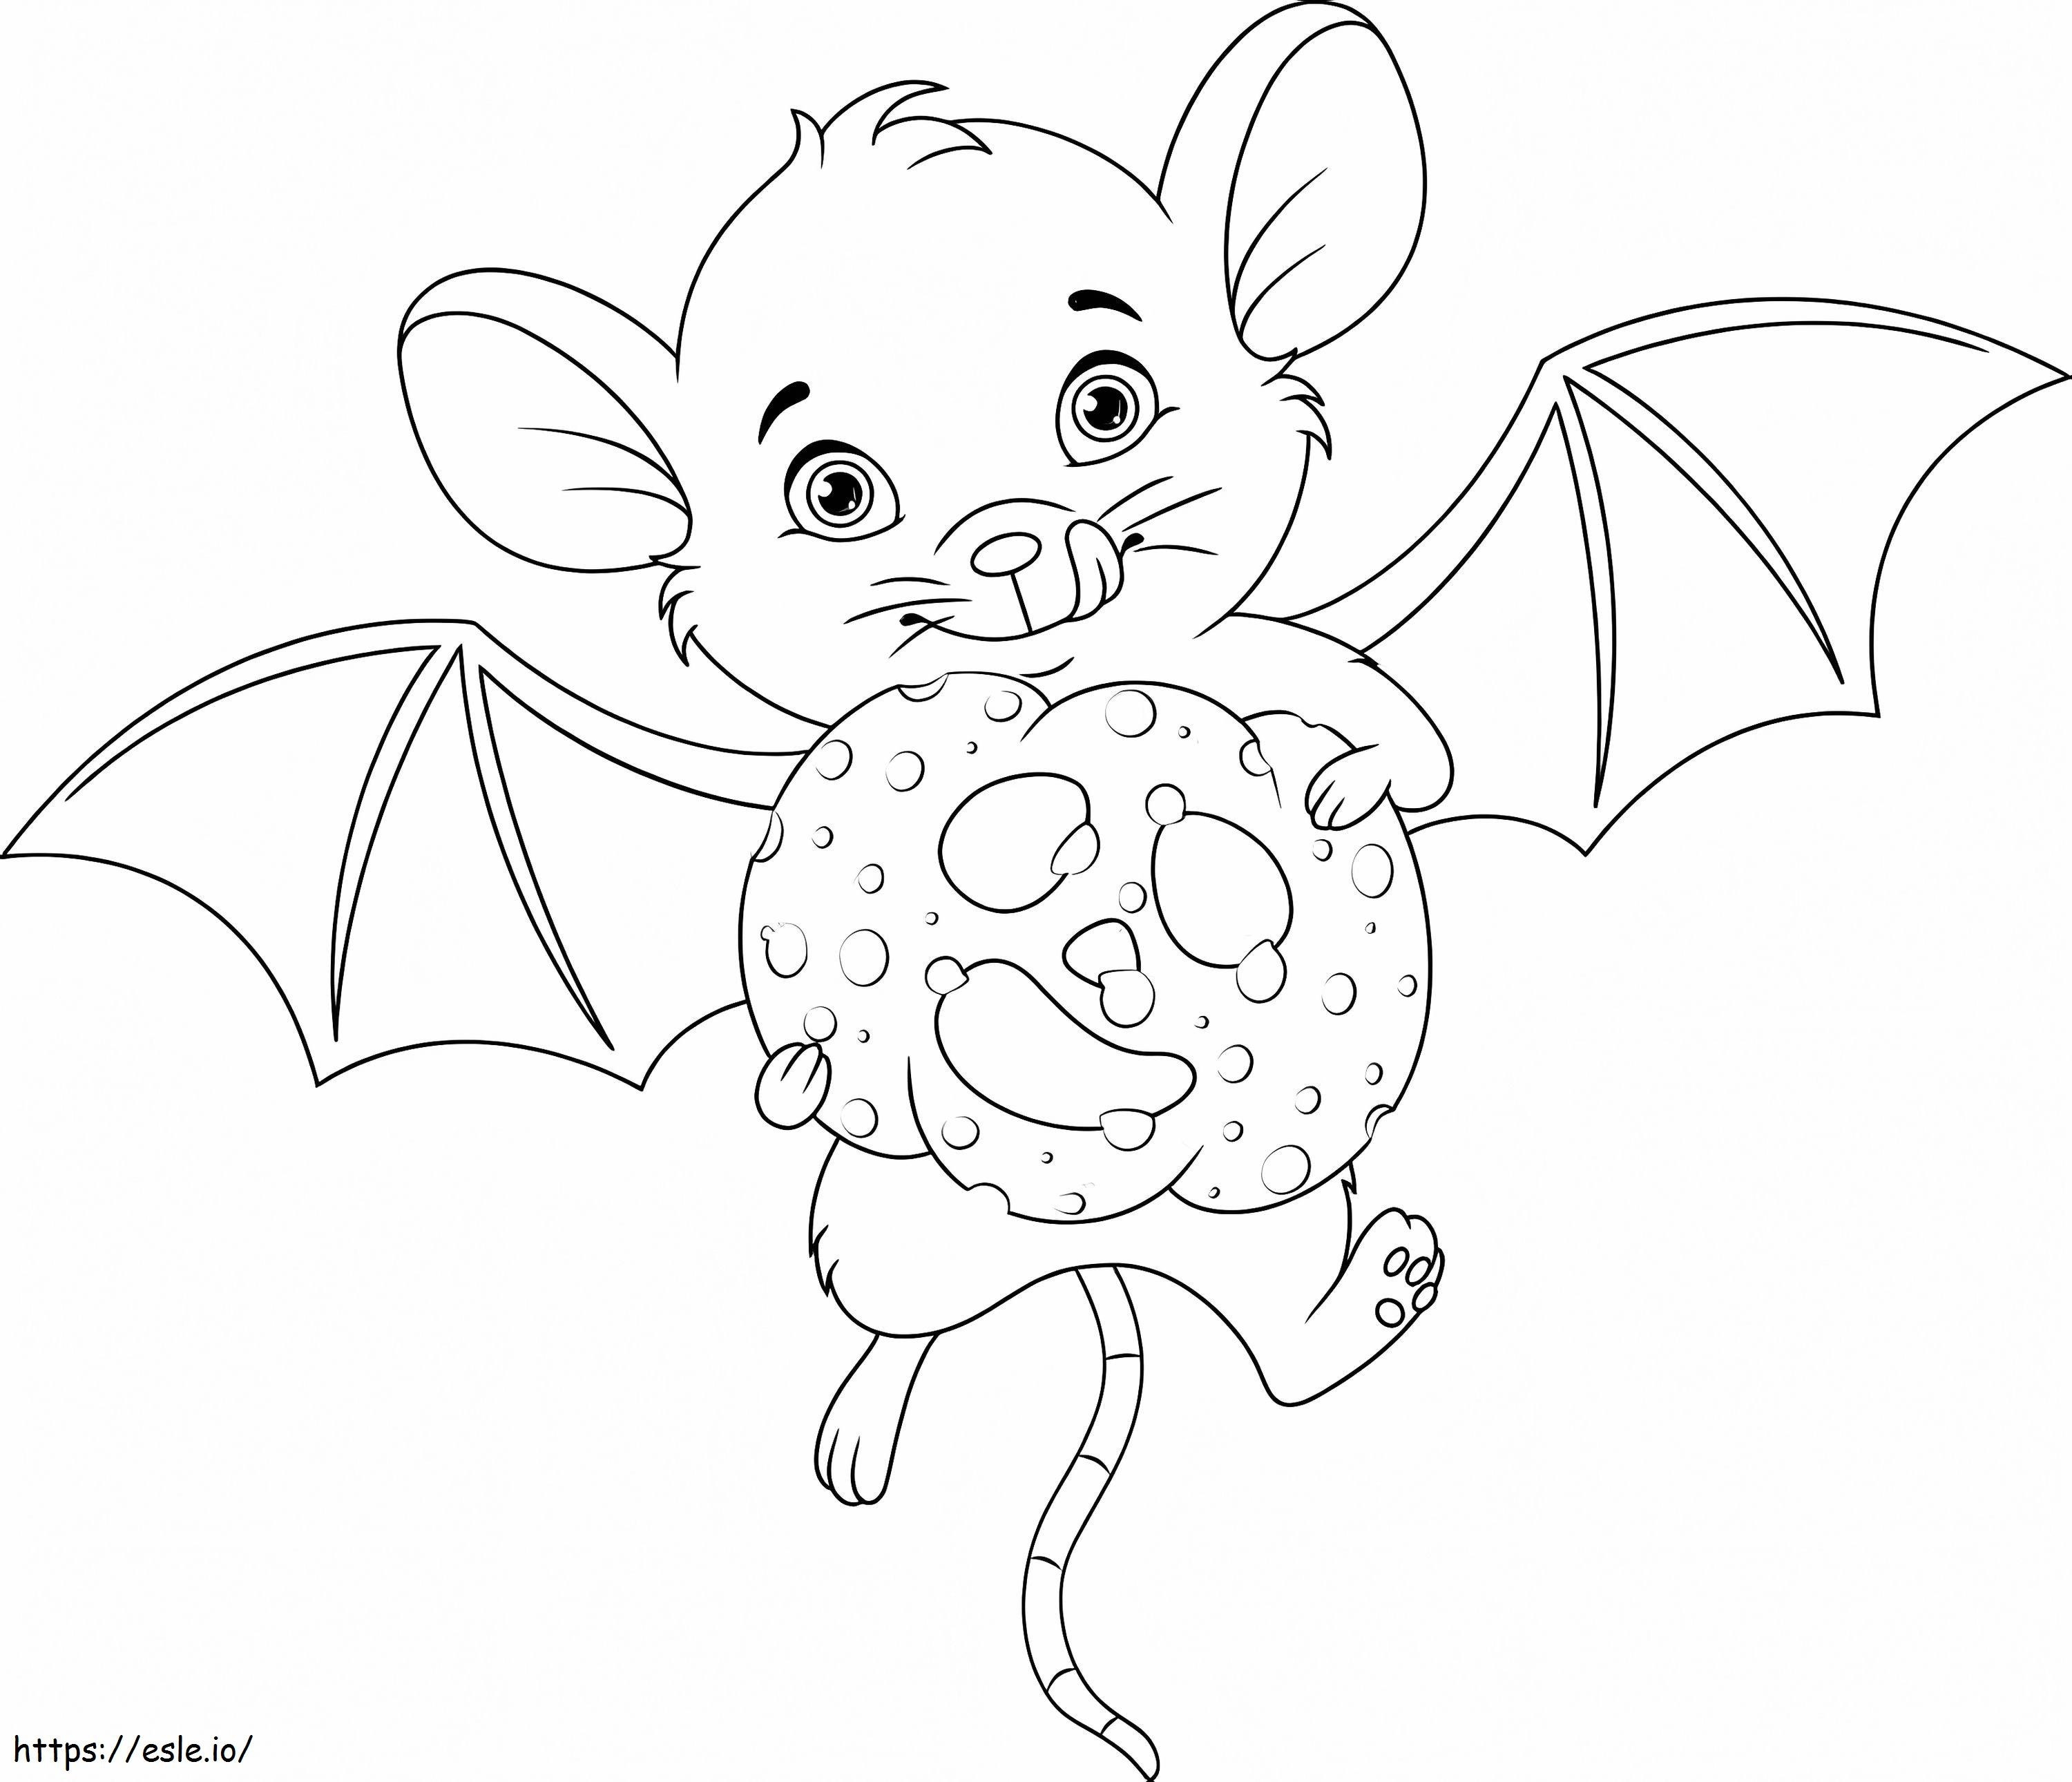 Bat Holding Cake coloring page